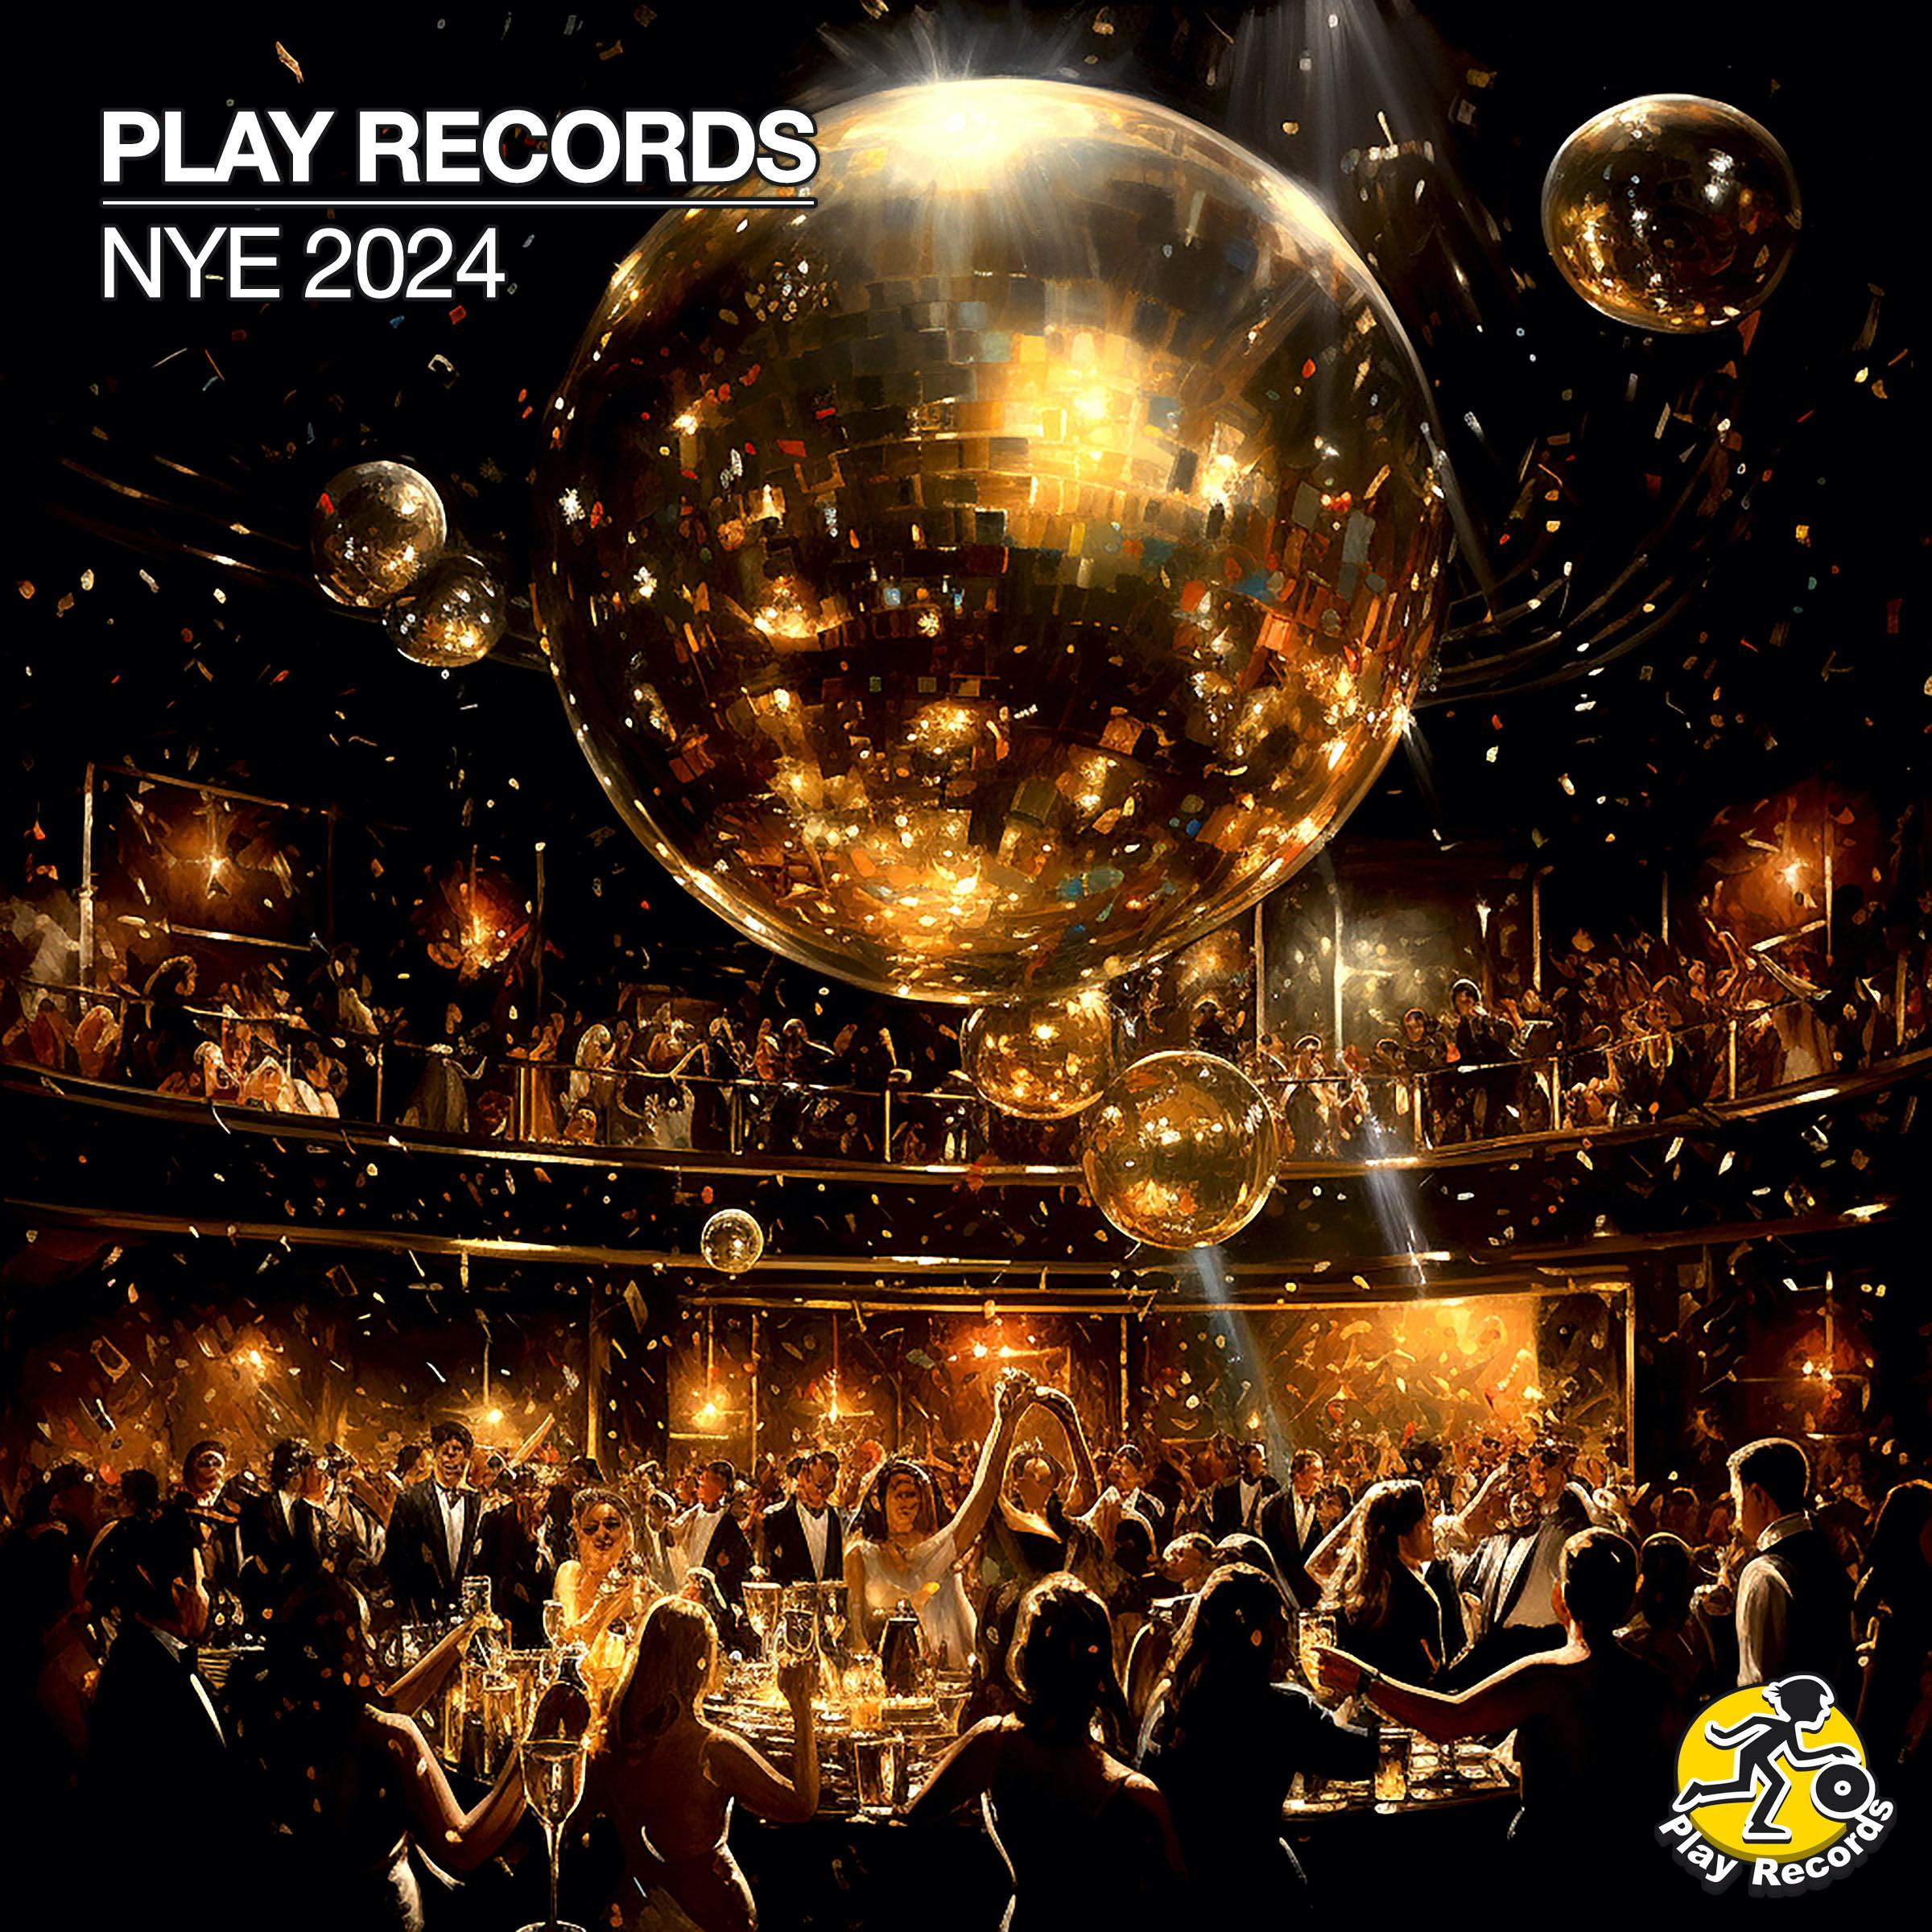 Play Records Celebrate the End of 2023 with the Release of 'NYE 2024'